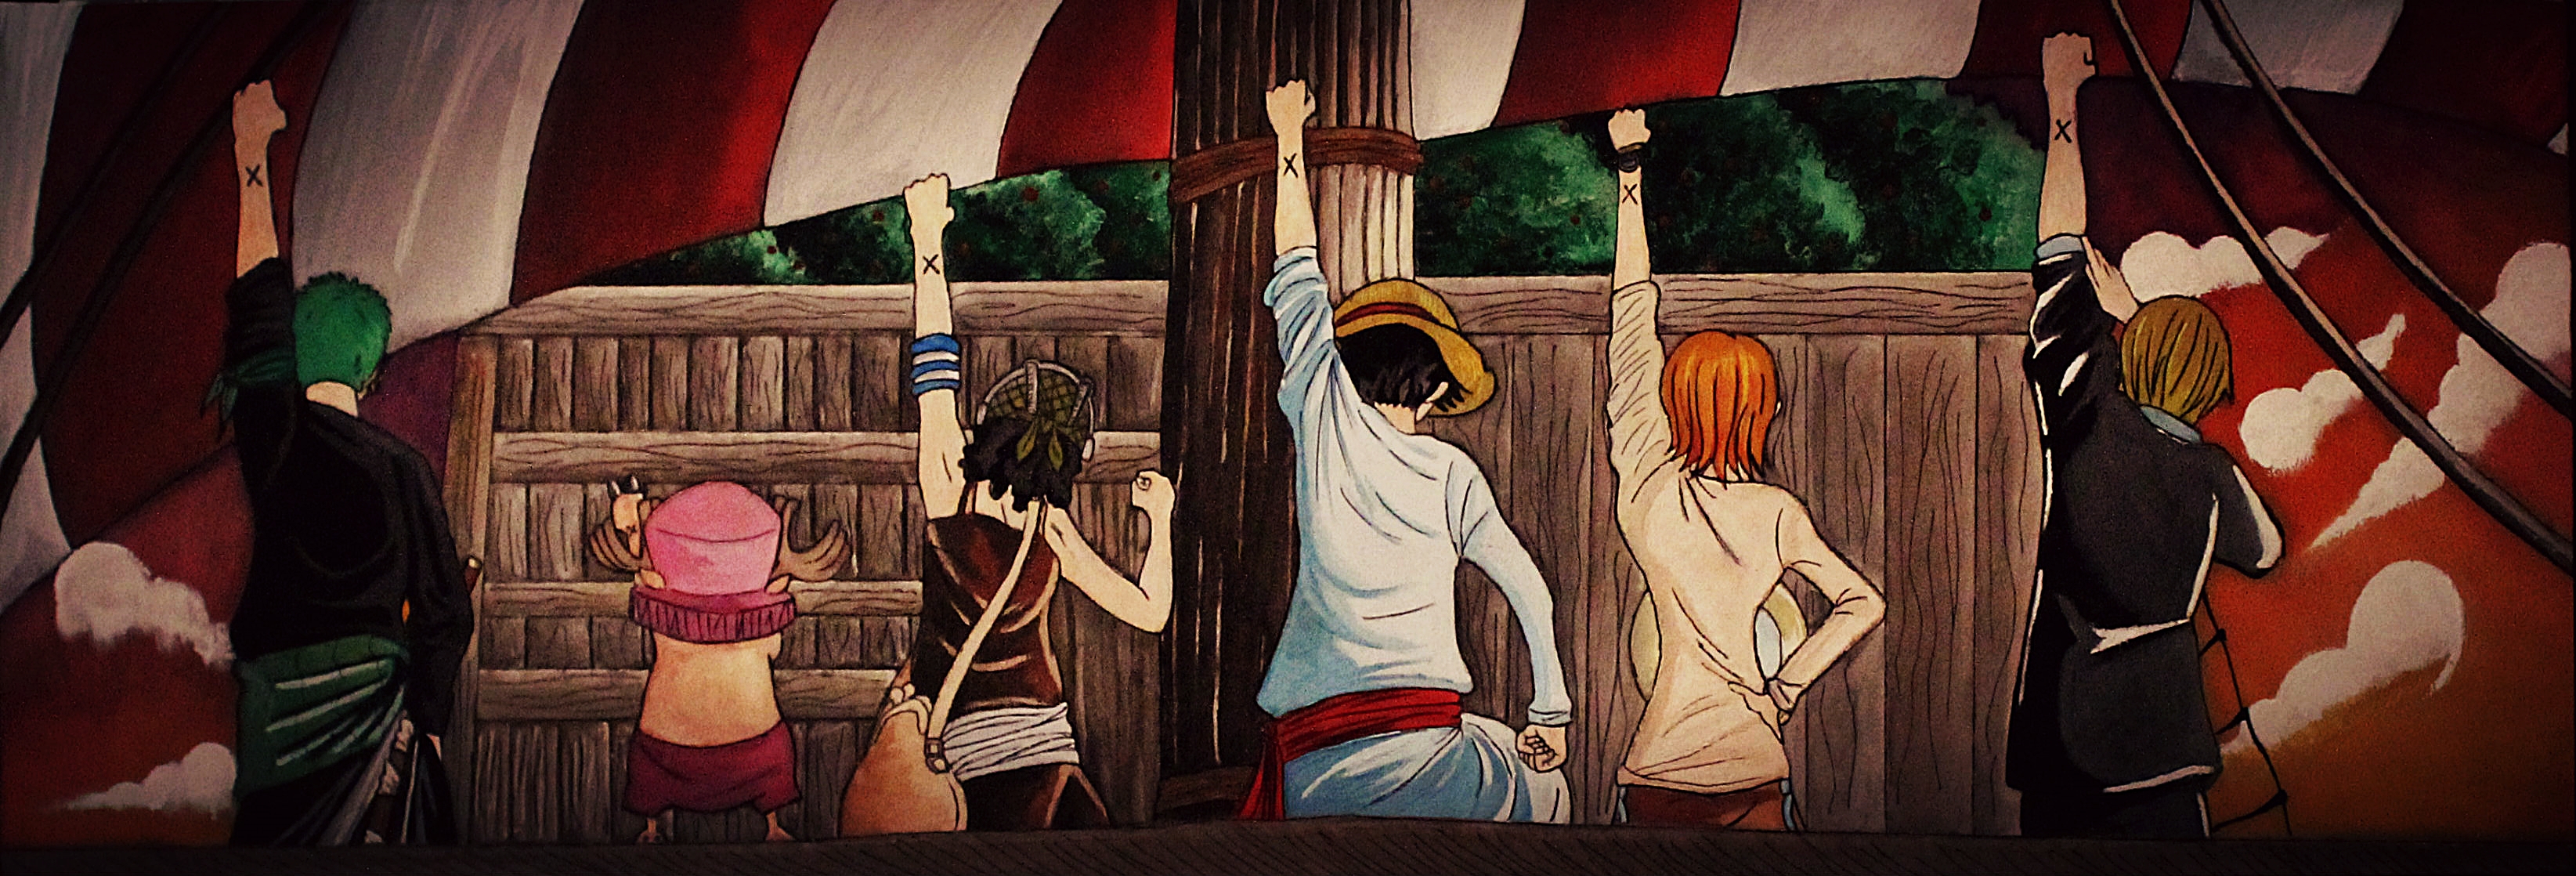 Anime 3289x1118 anime One Piece back fist arms up